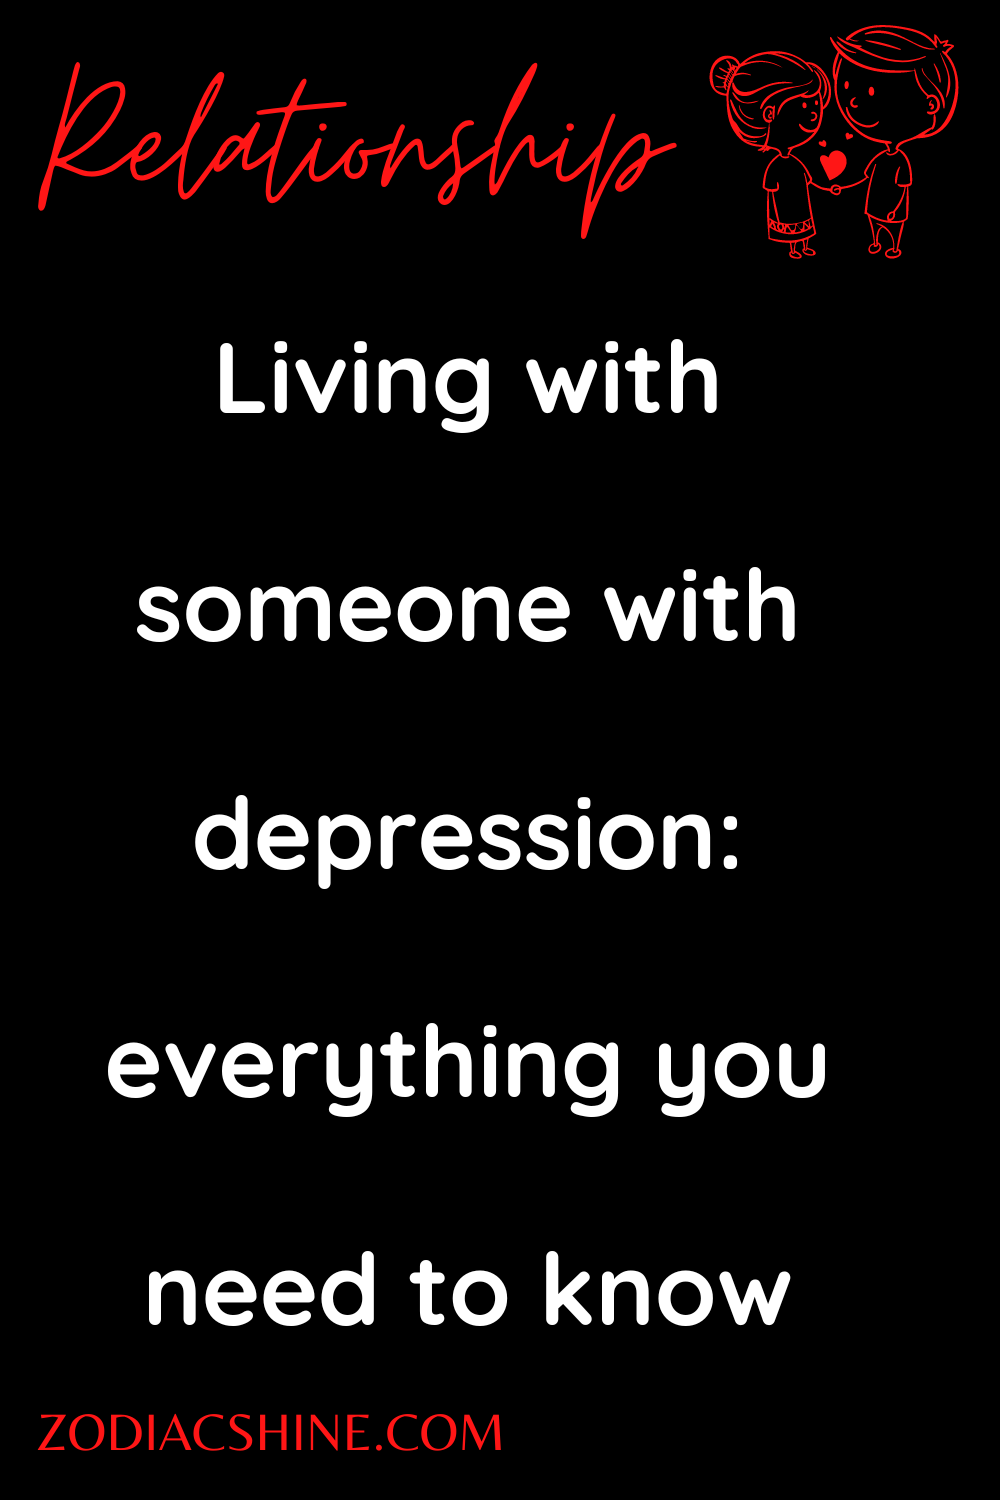 Living with someone with depression: everything you need to know